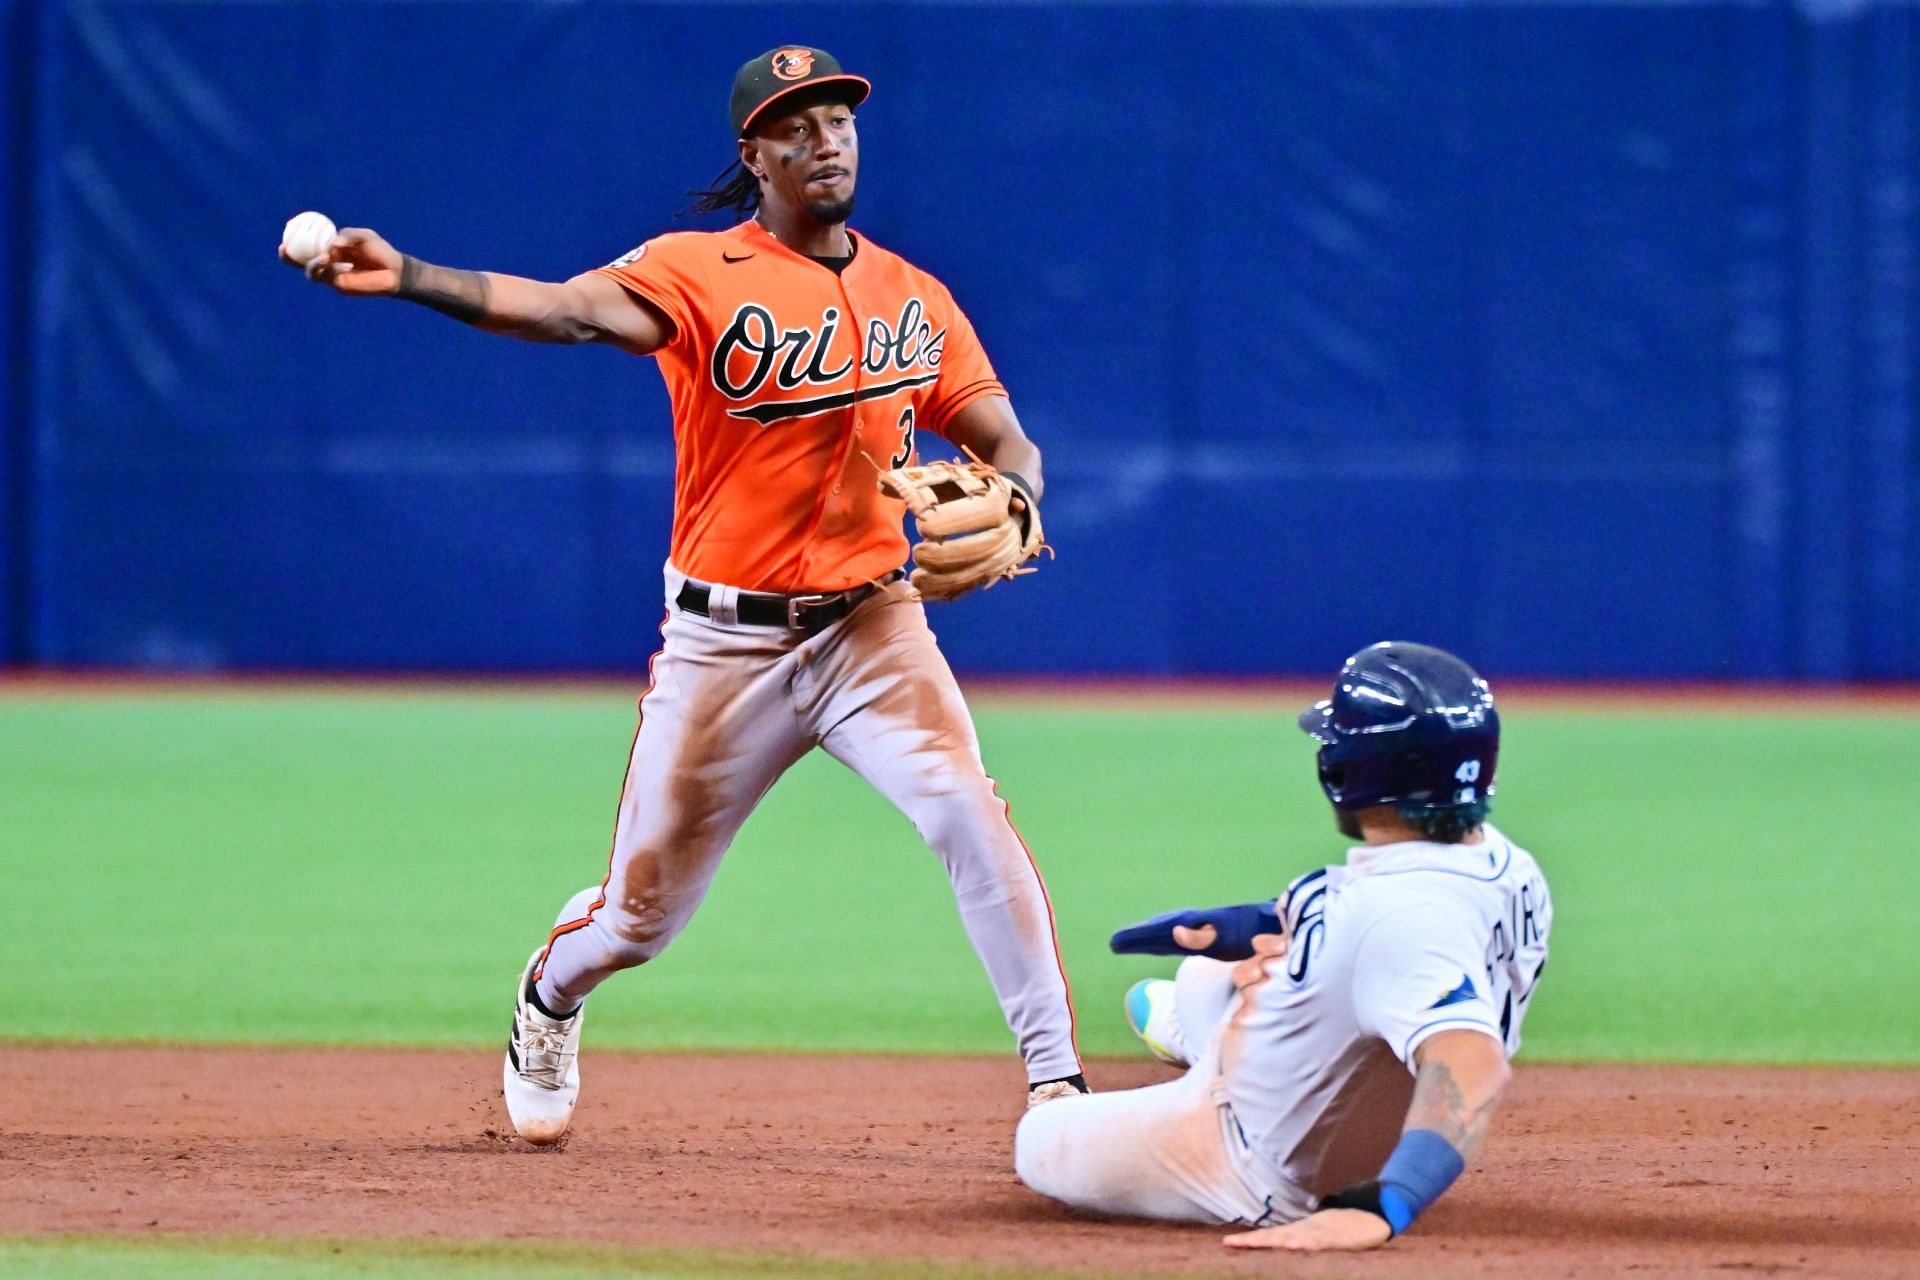 The Orioles and Rays play Tuesday.